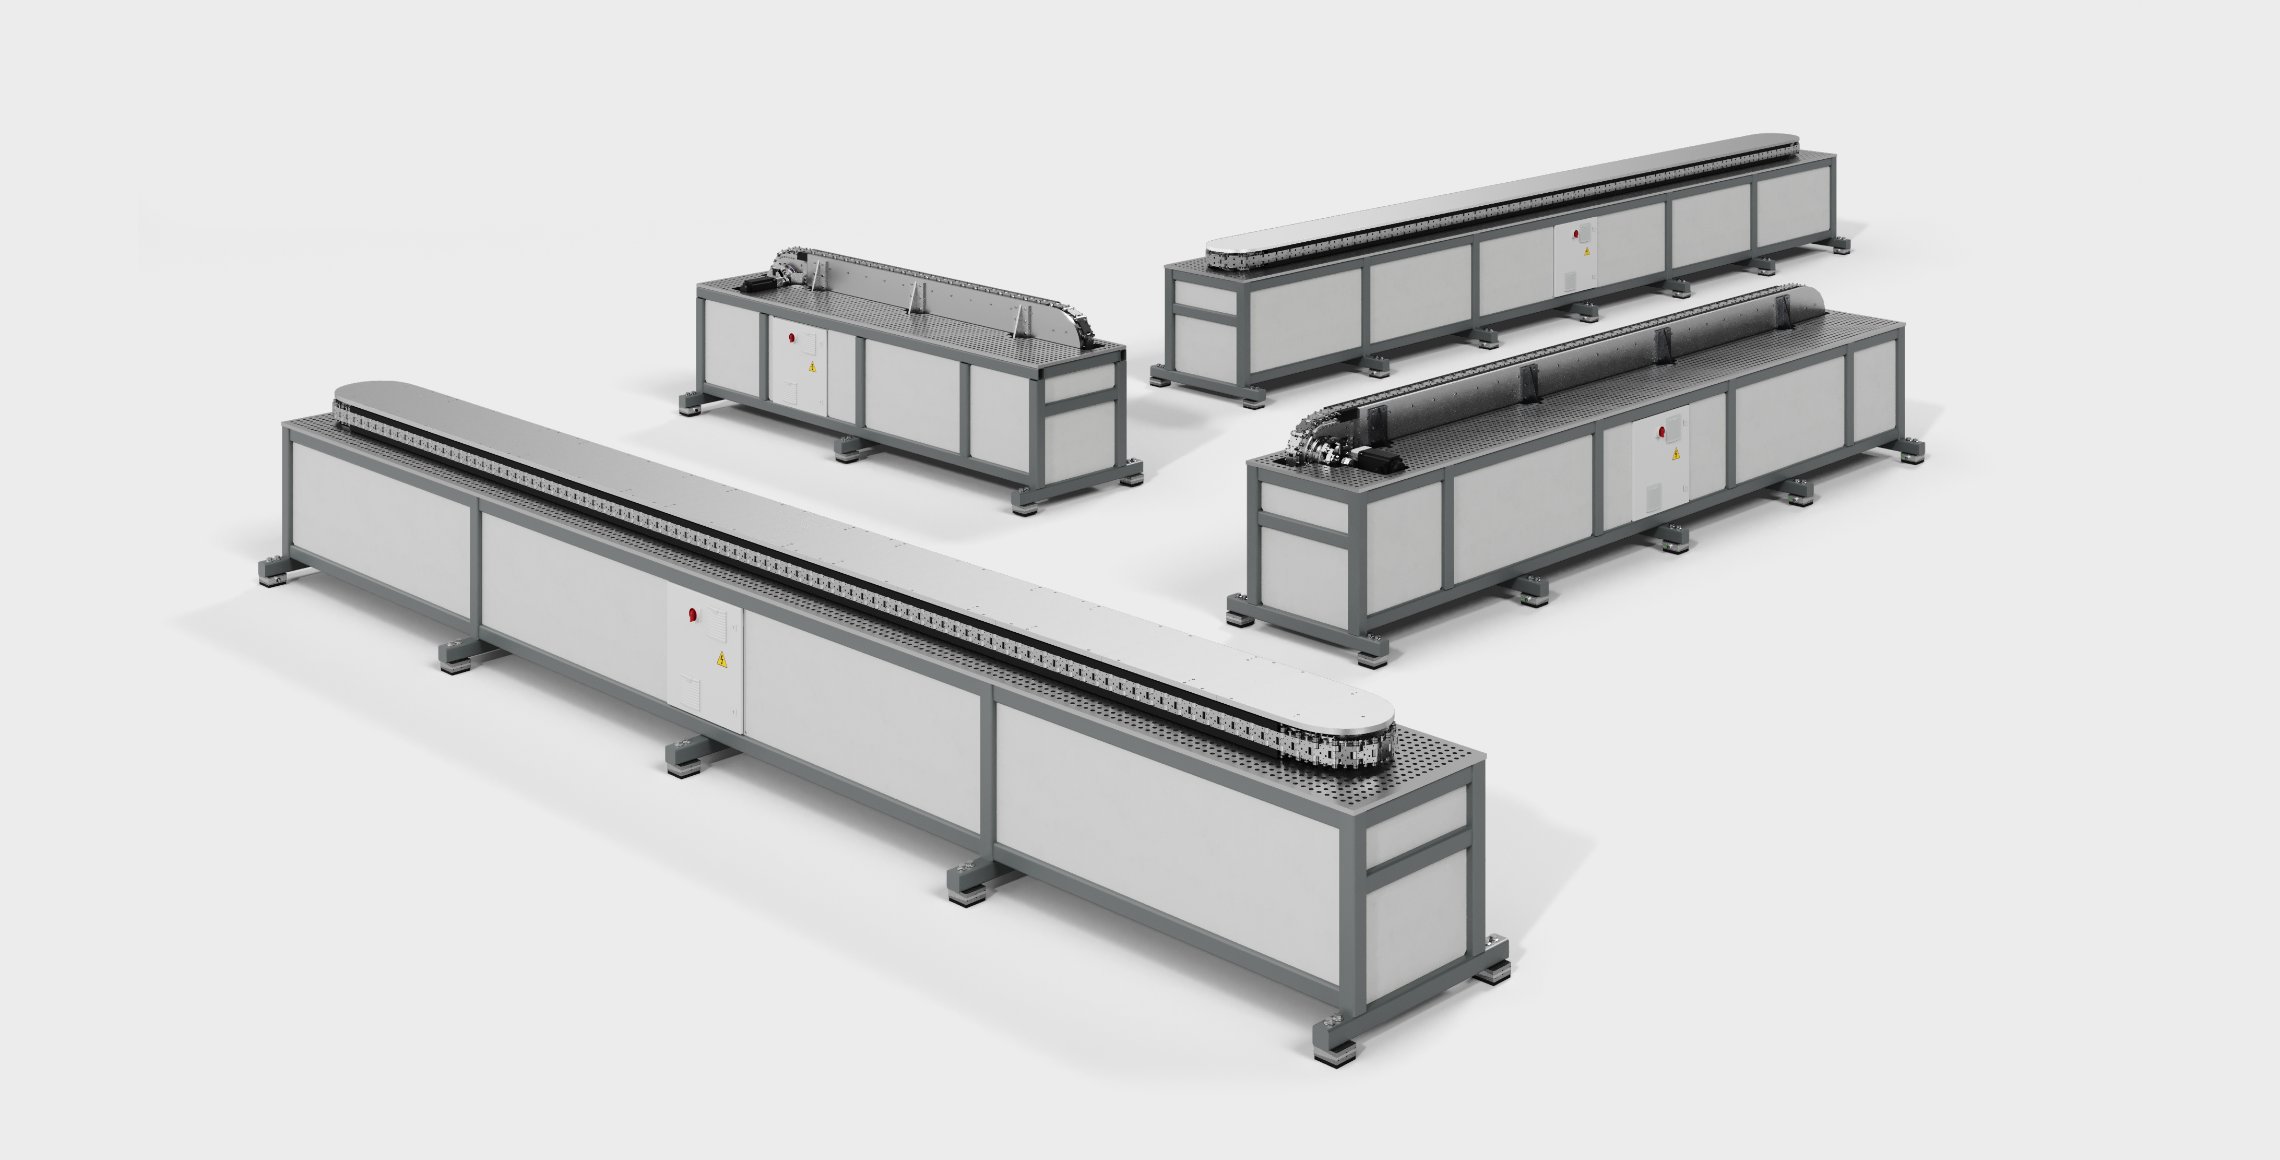 Product overview of LS Link conveyor system from WEISS